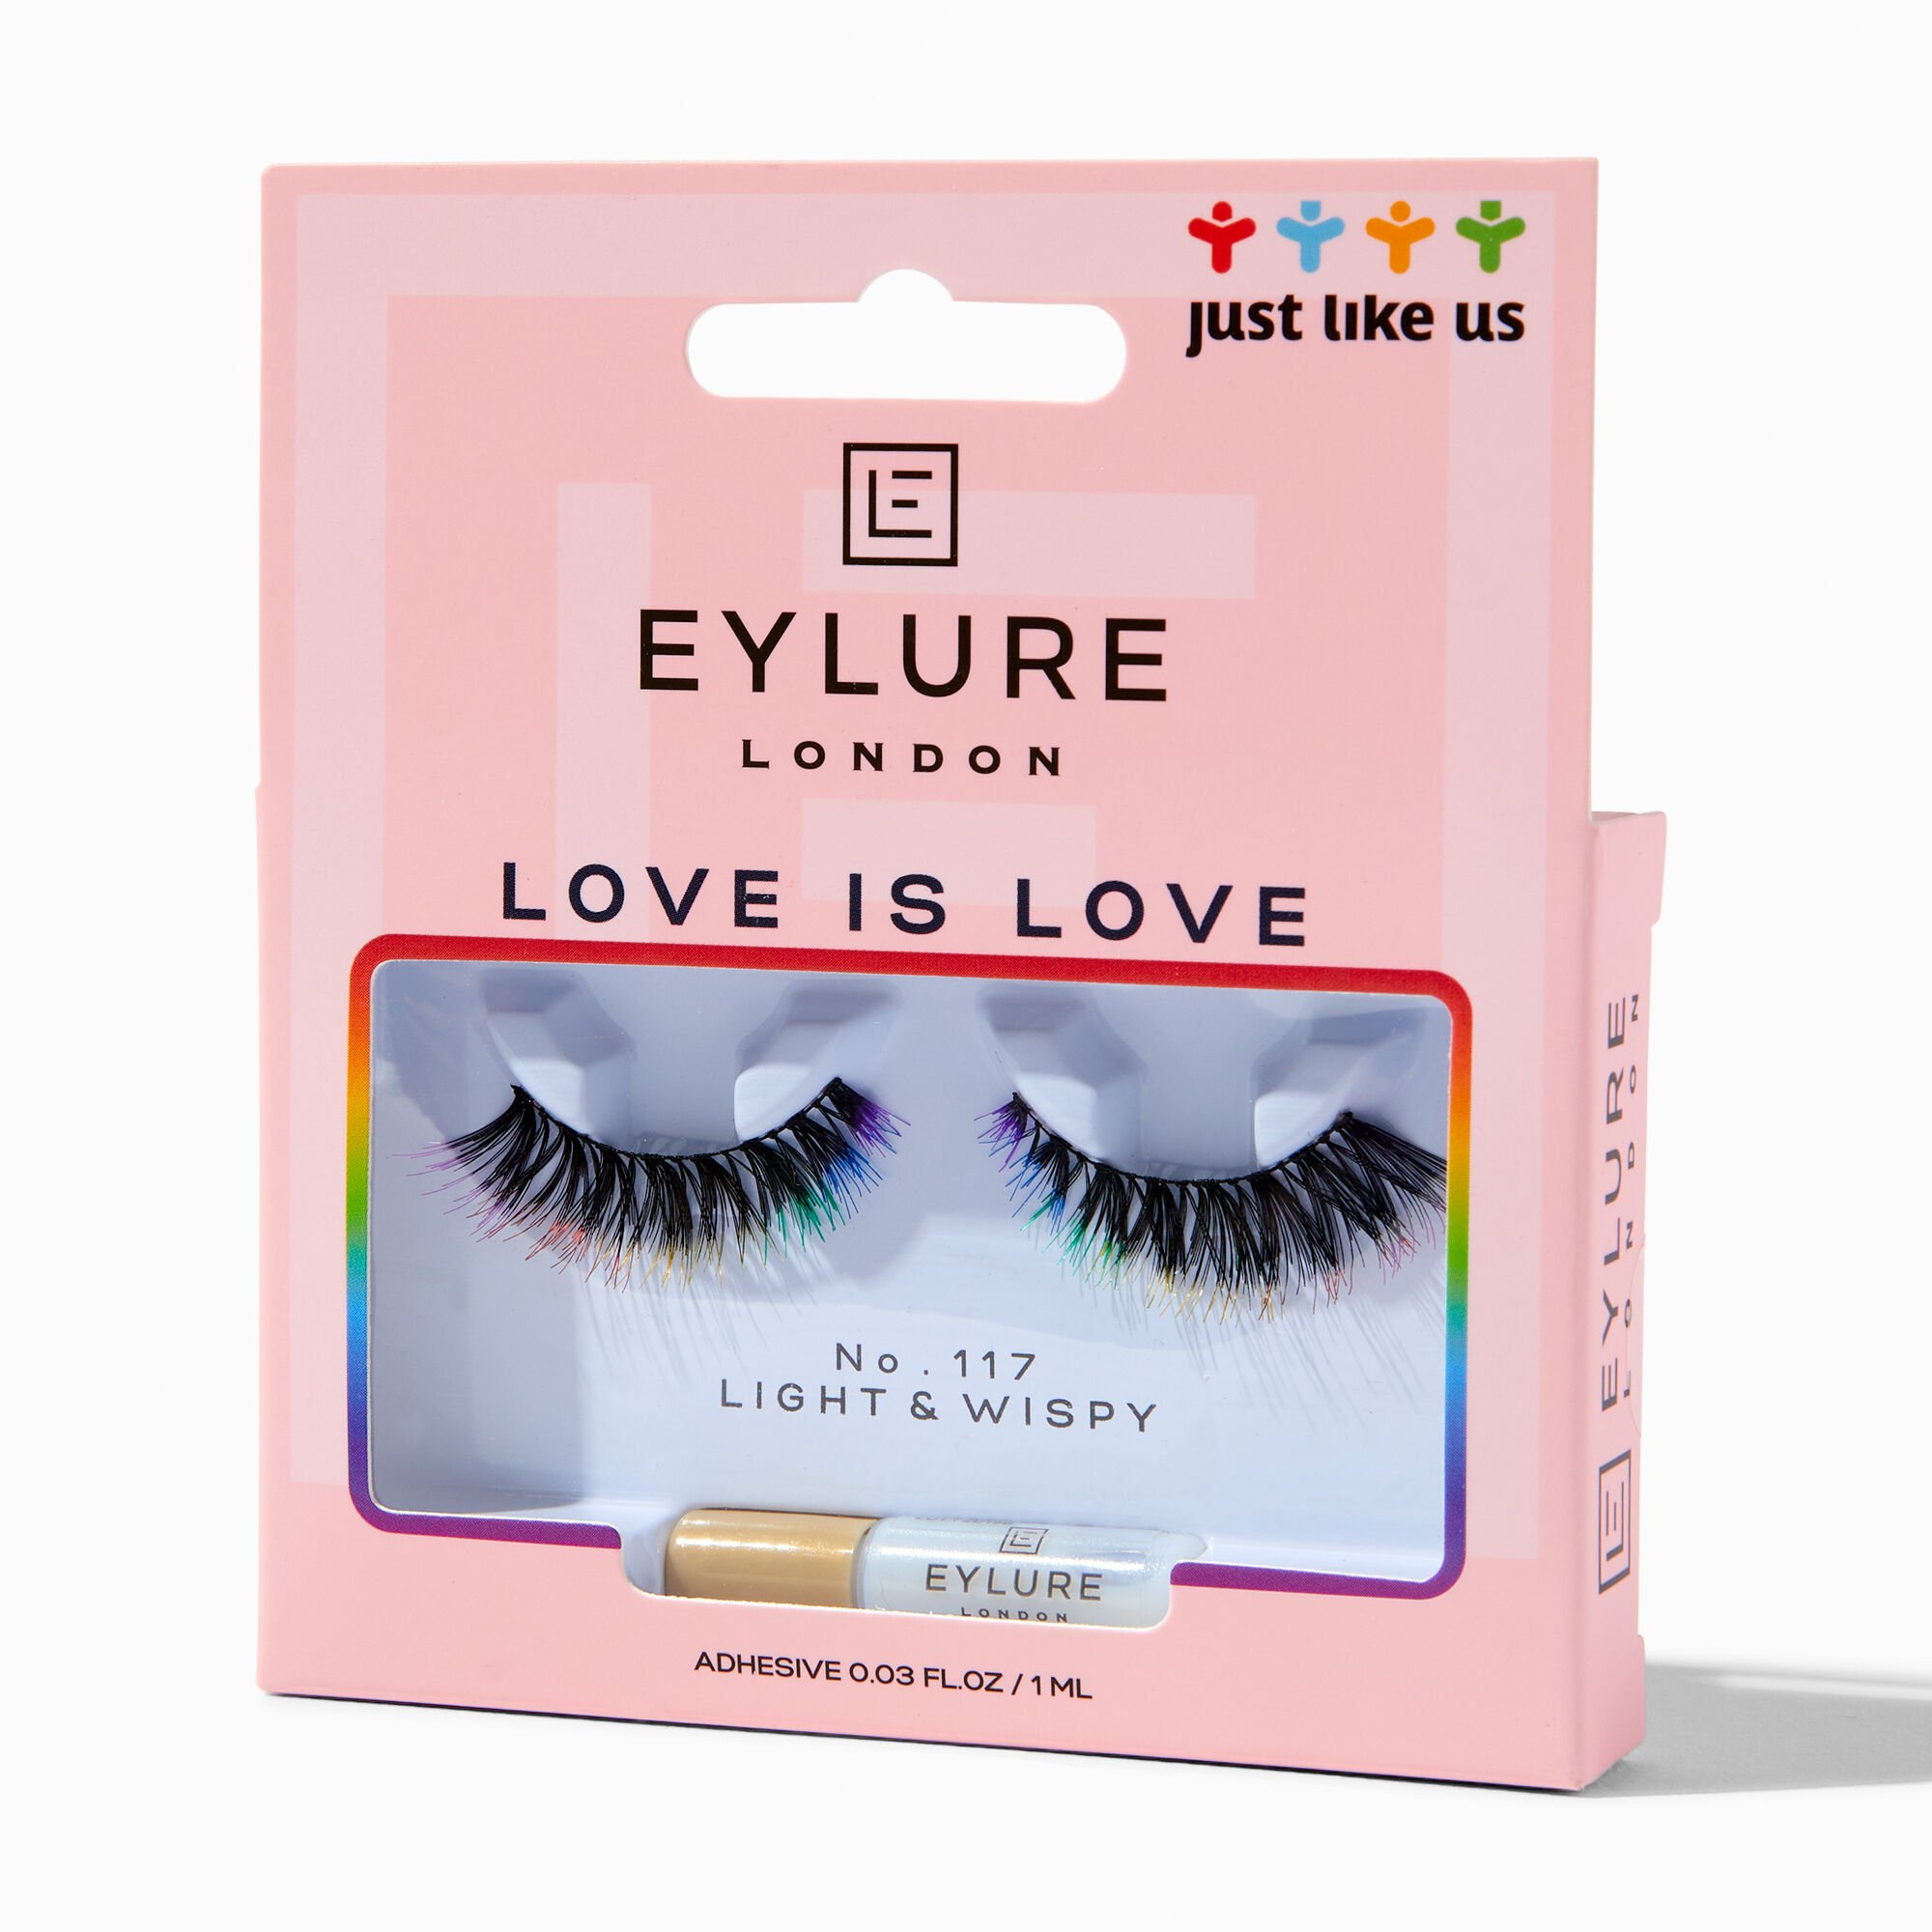 View Claires Eylure Love Is Faux Mink Eyelashes No 117 Light Wispy Black information